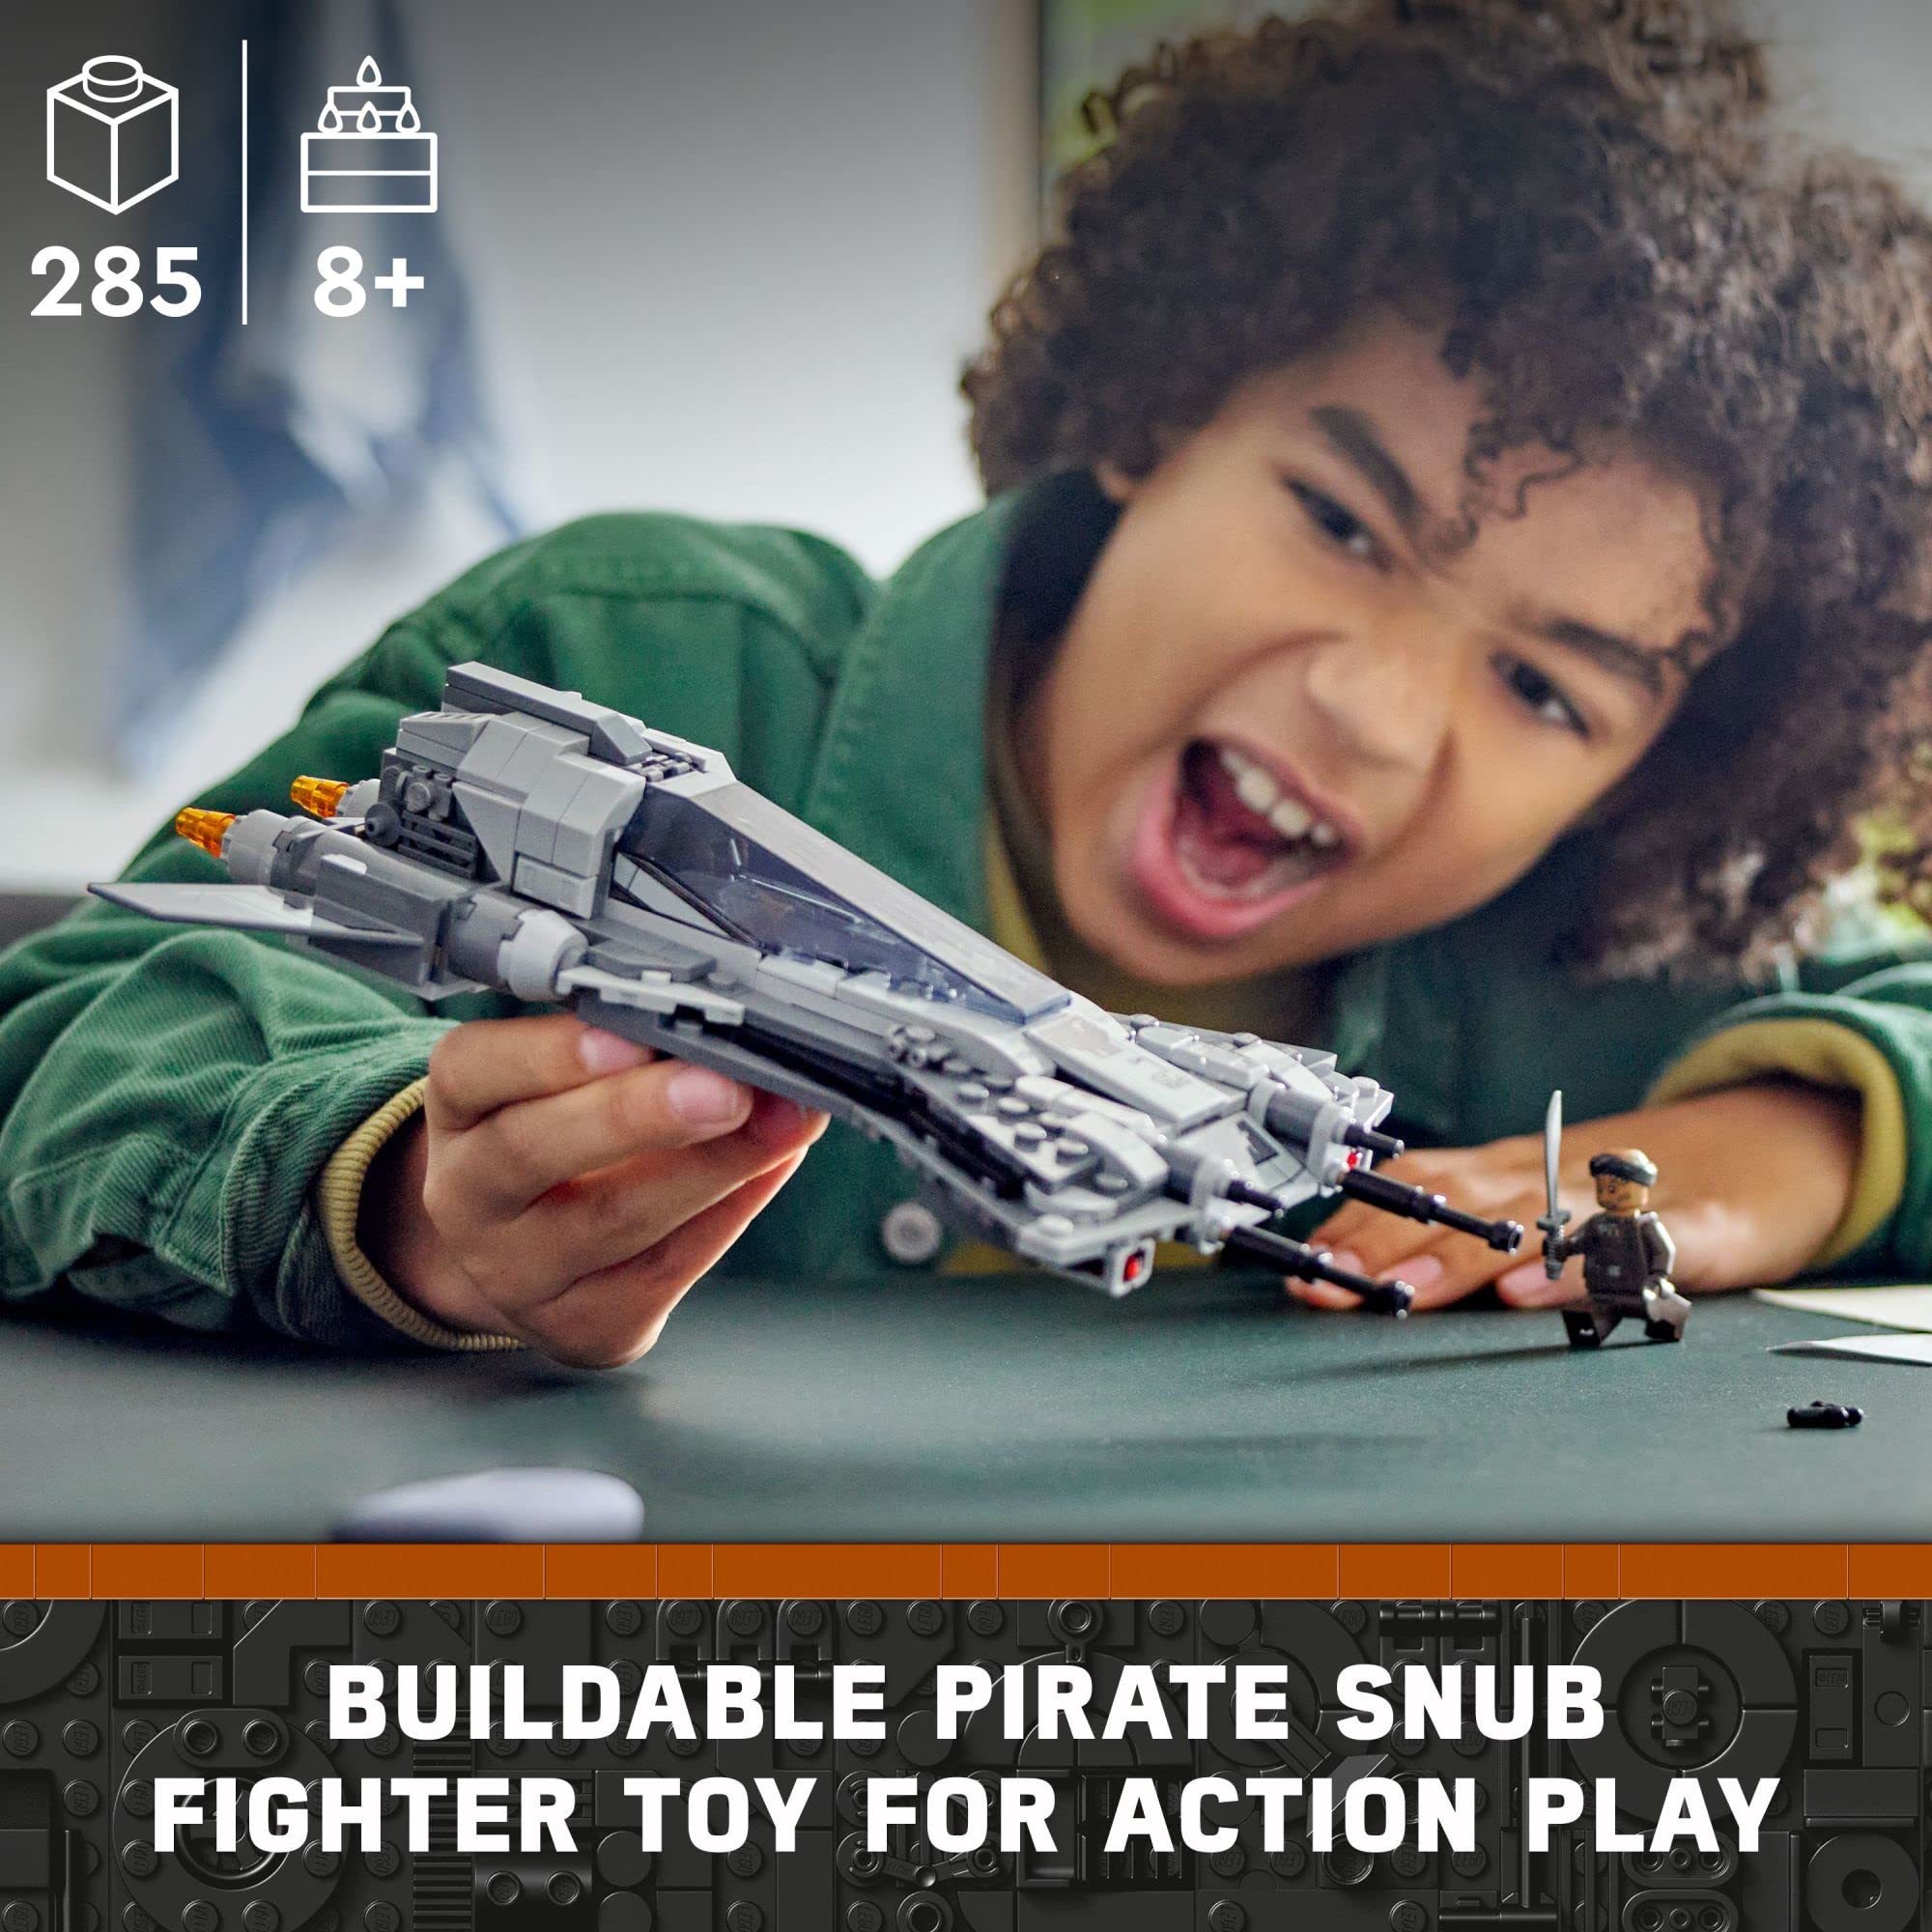 LEGO Star Wars Pirate Snub Fighter 75346 Buildable Starfighter Playset Featuring Pirate Pilot and Vane Characters from The Mandalorian Season 3, Birthday Gift Idea for Boys and Girls Ages 8 and up